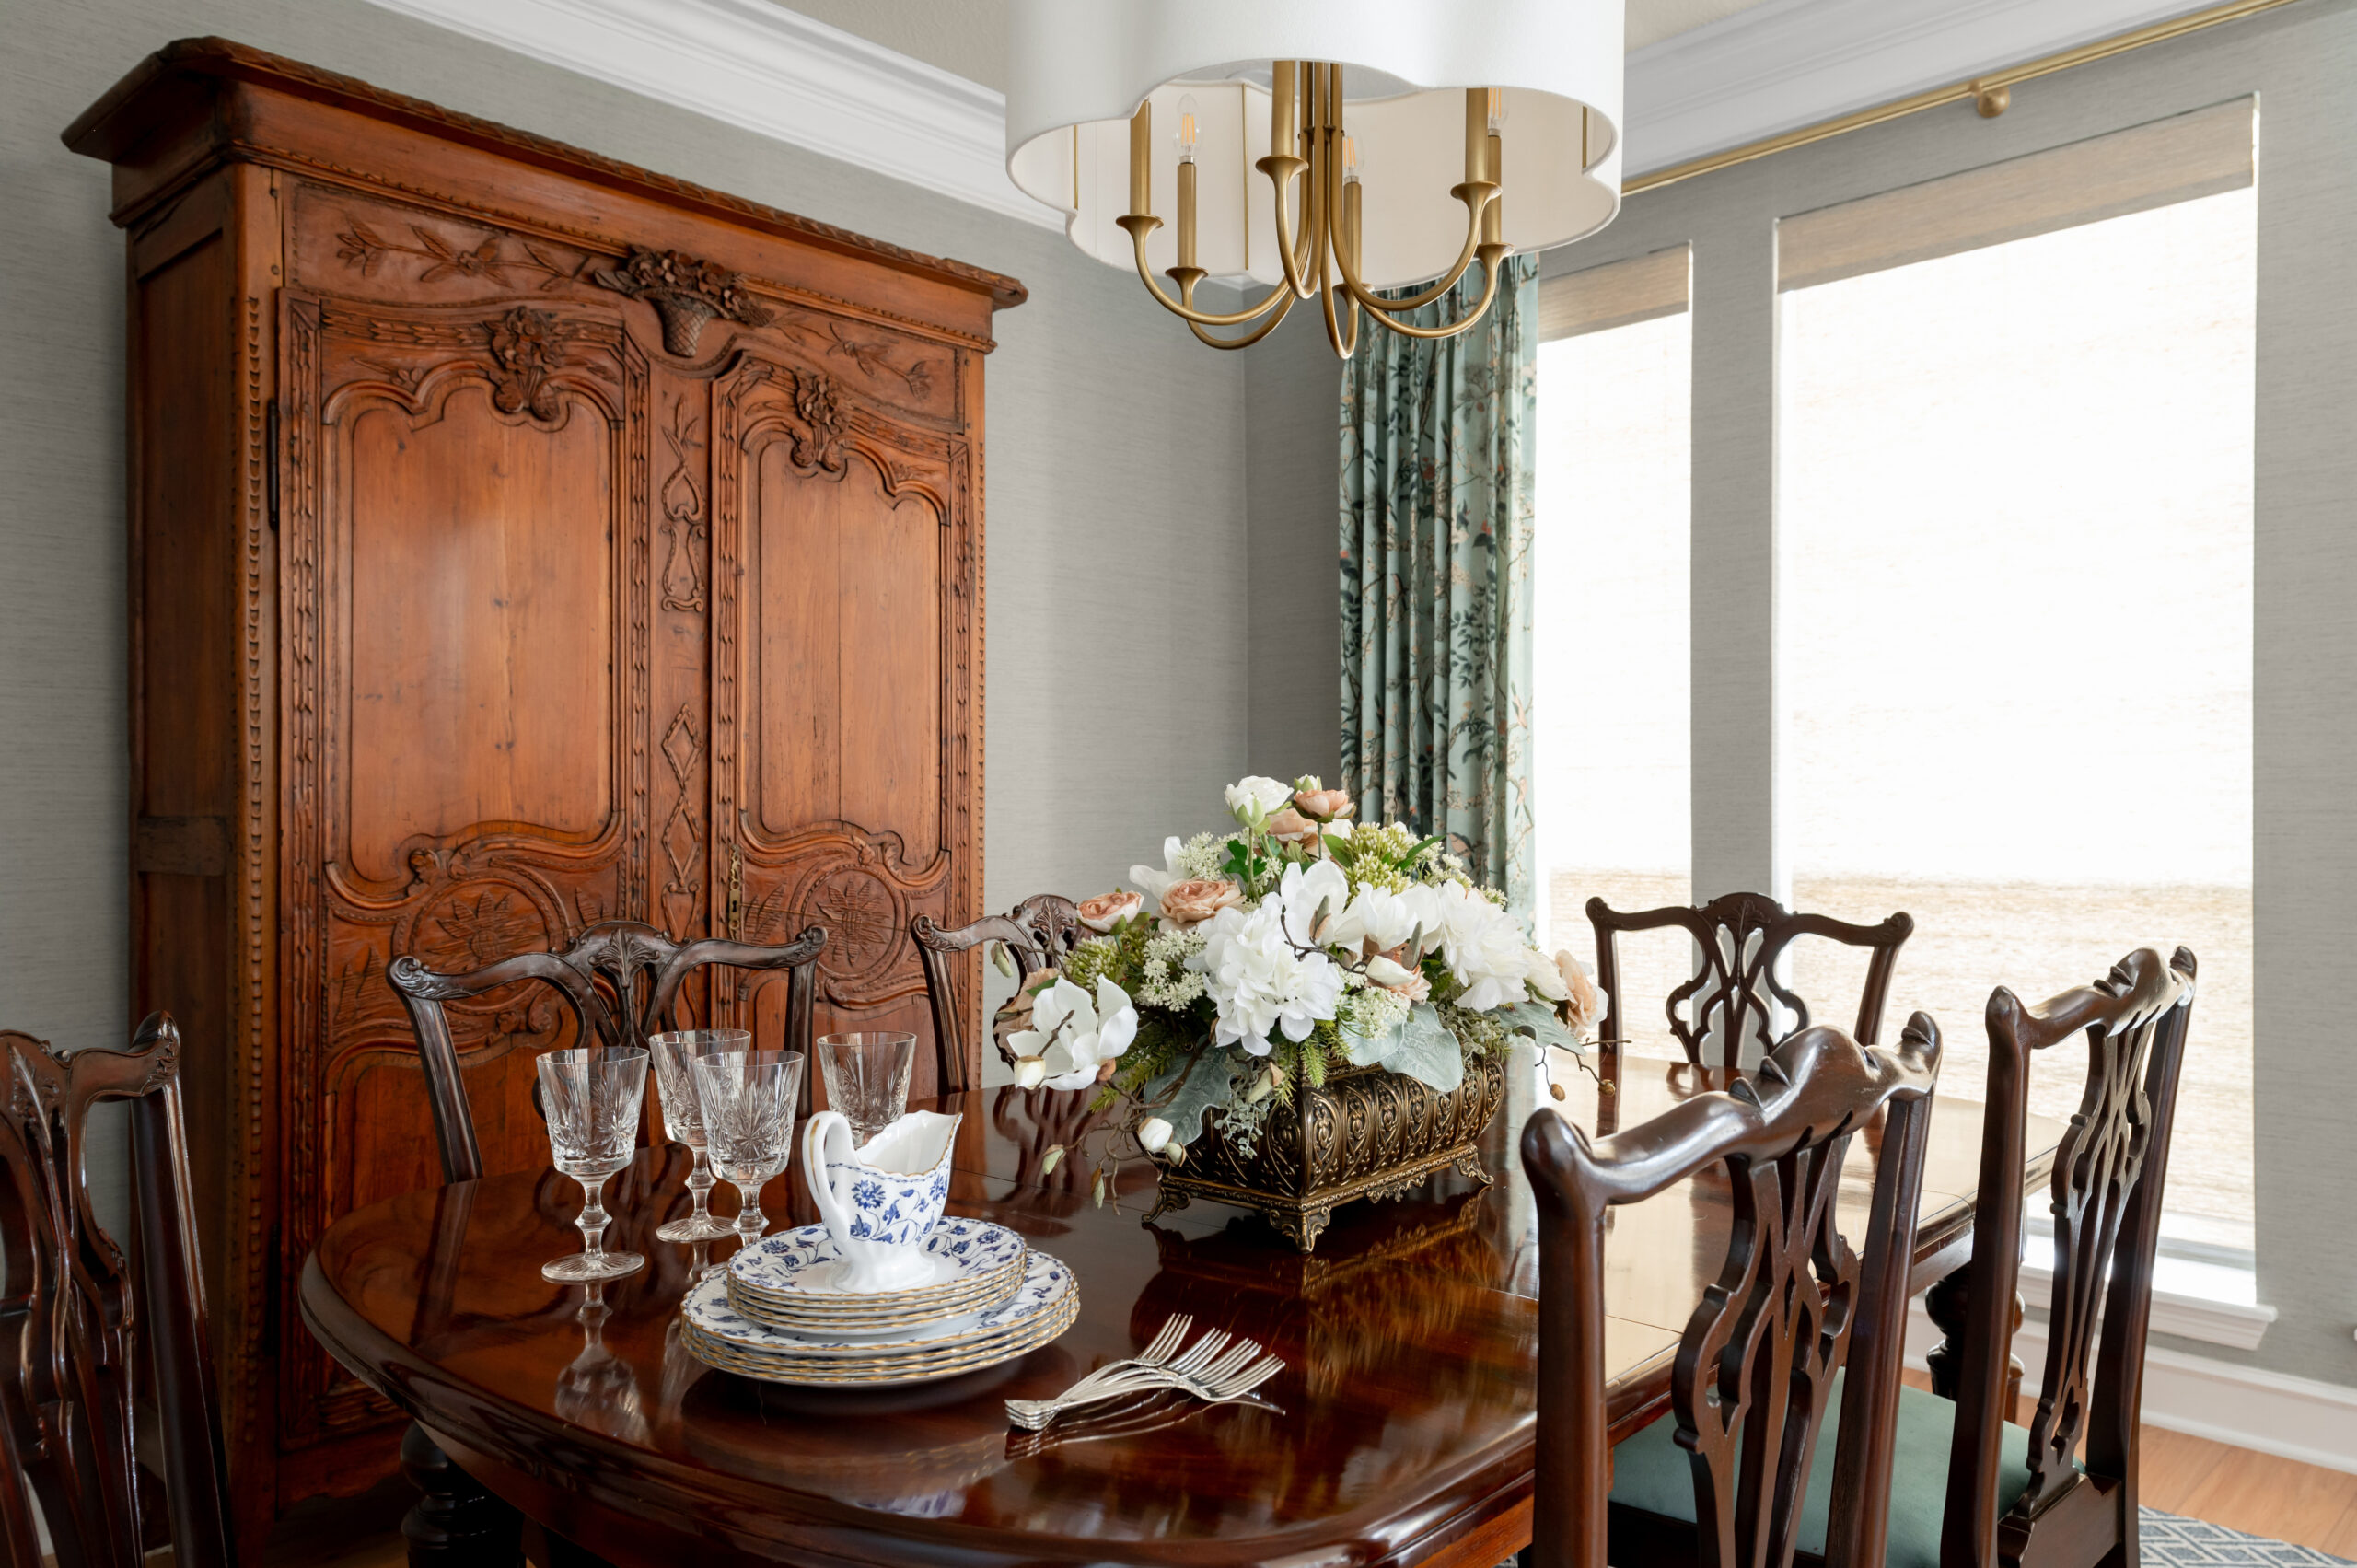 Dining room interior design with wooden dining room table and chairs